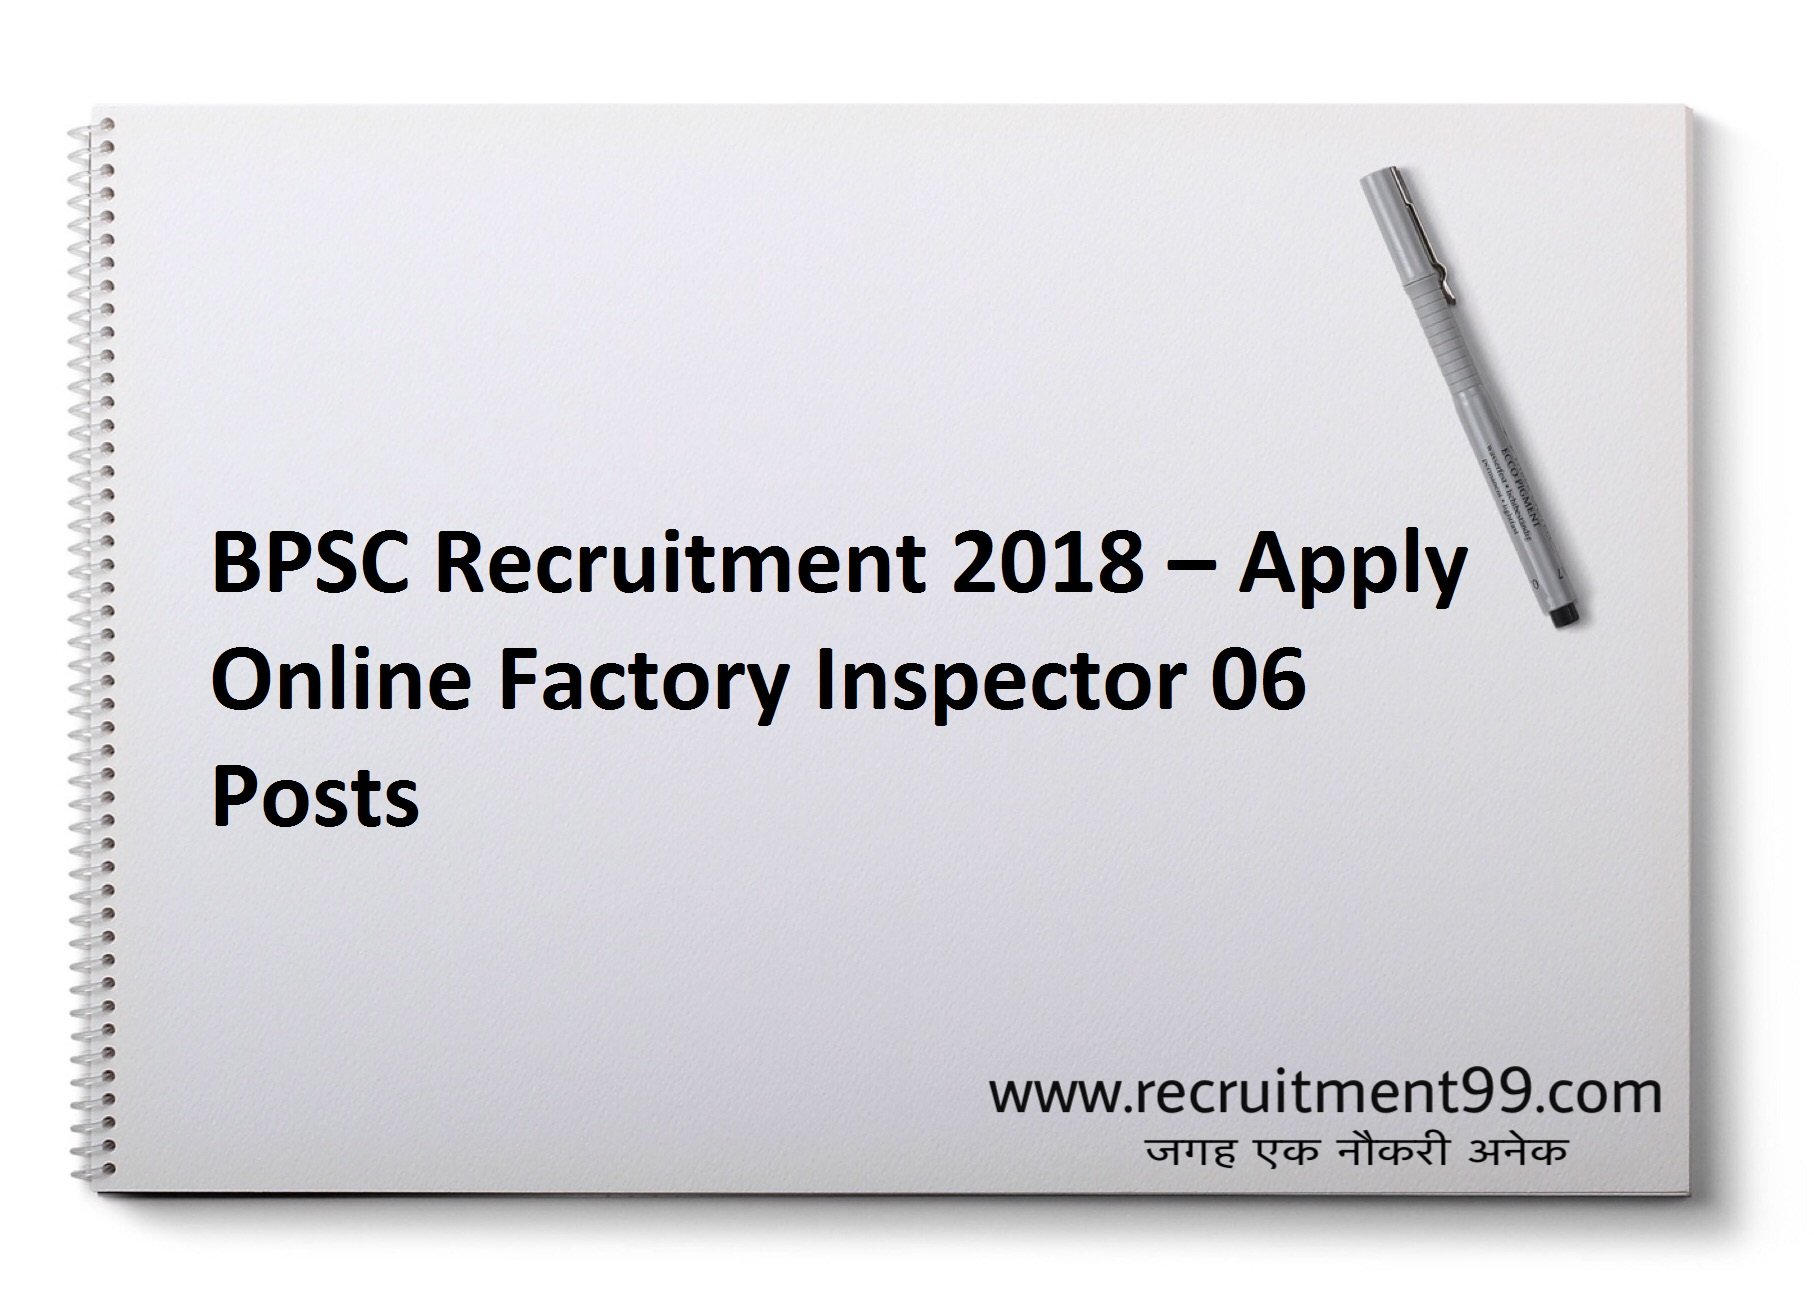 BPSC Factory Inspector Recruitment Admit Card & Result 2018